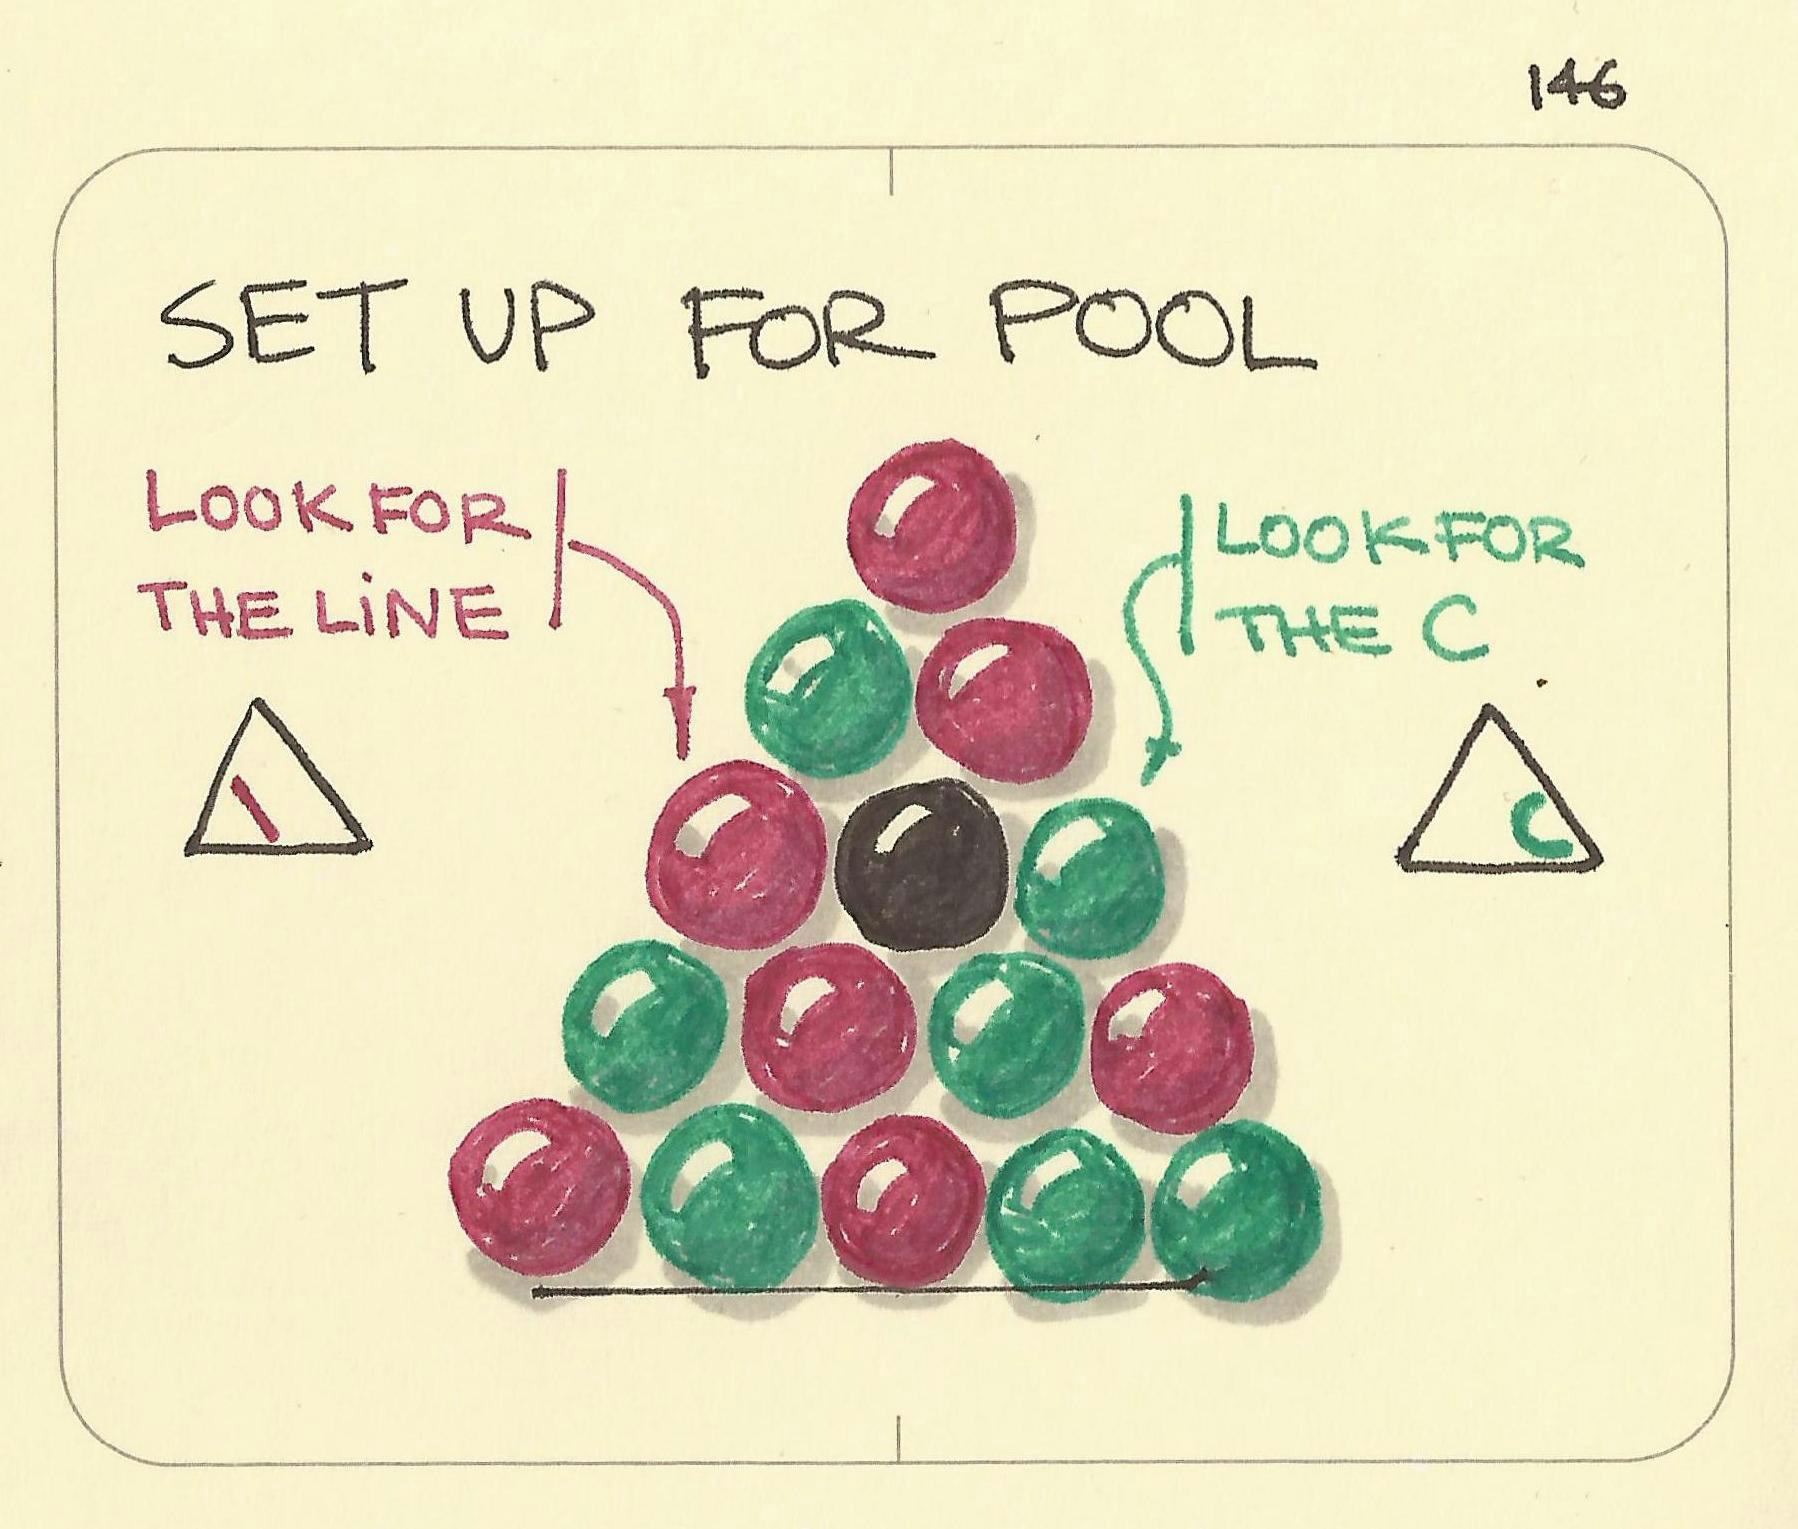 Set up for pool - Sketchplanations